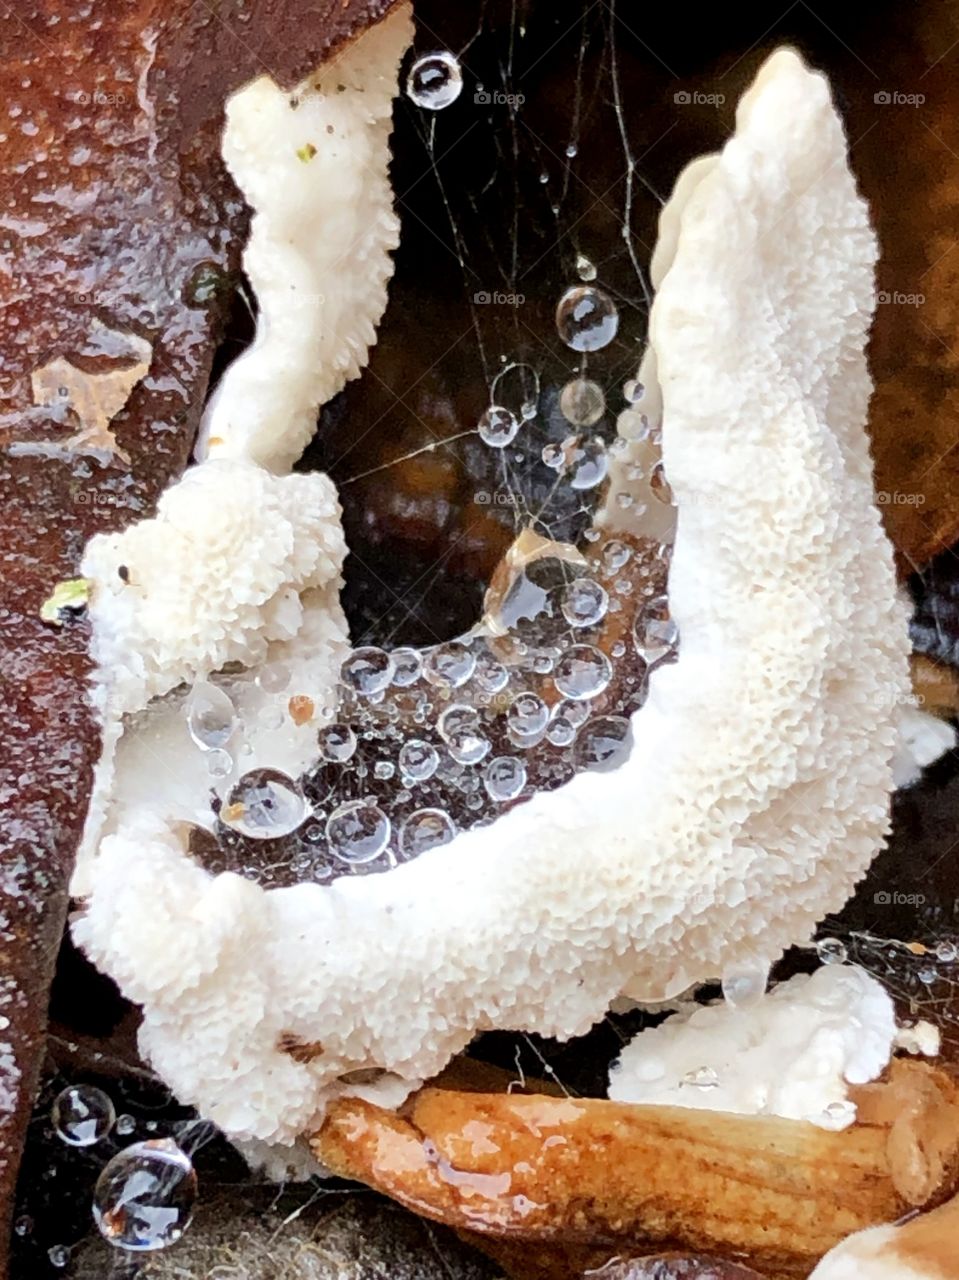 Tiny raindrops caught in a little mushroom fungus cup, found in a tree stump cache.  